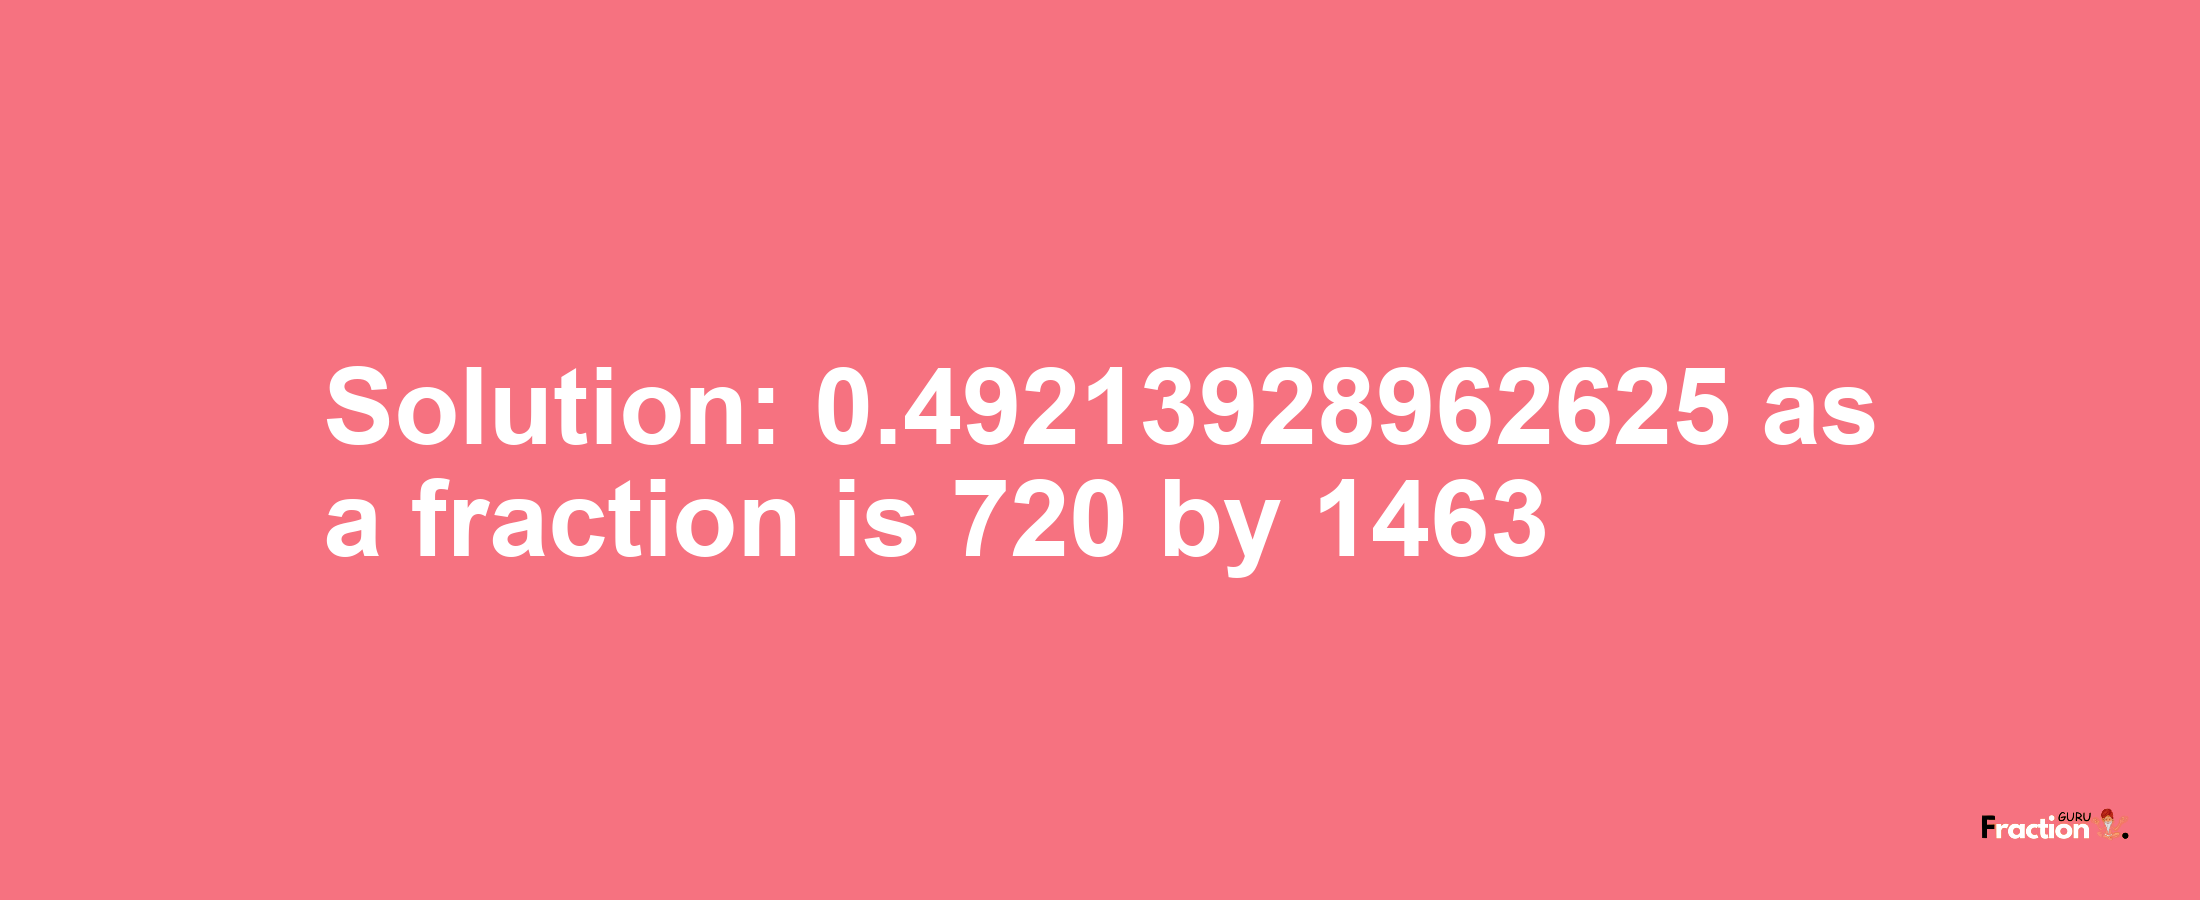 Solution:0.49213928962625 as a fraction is 720/1463